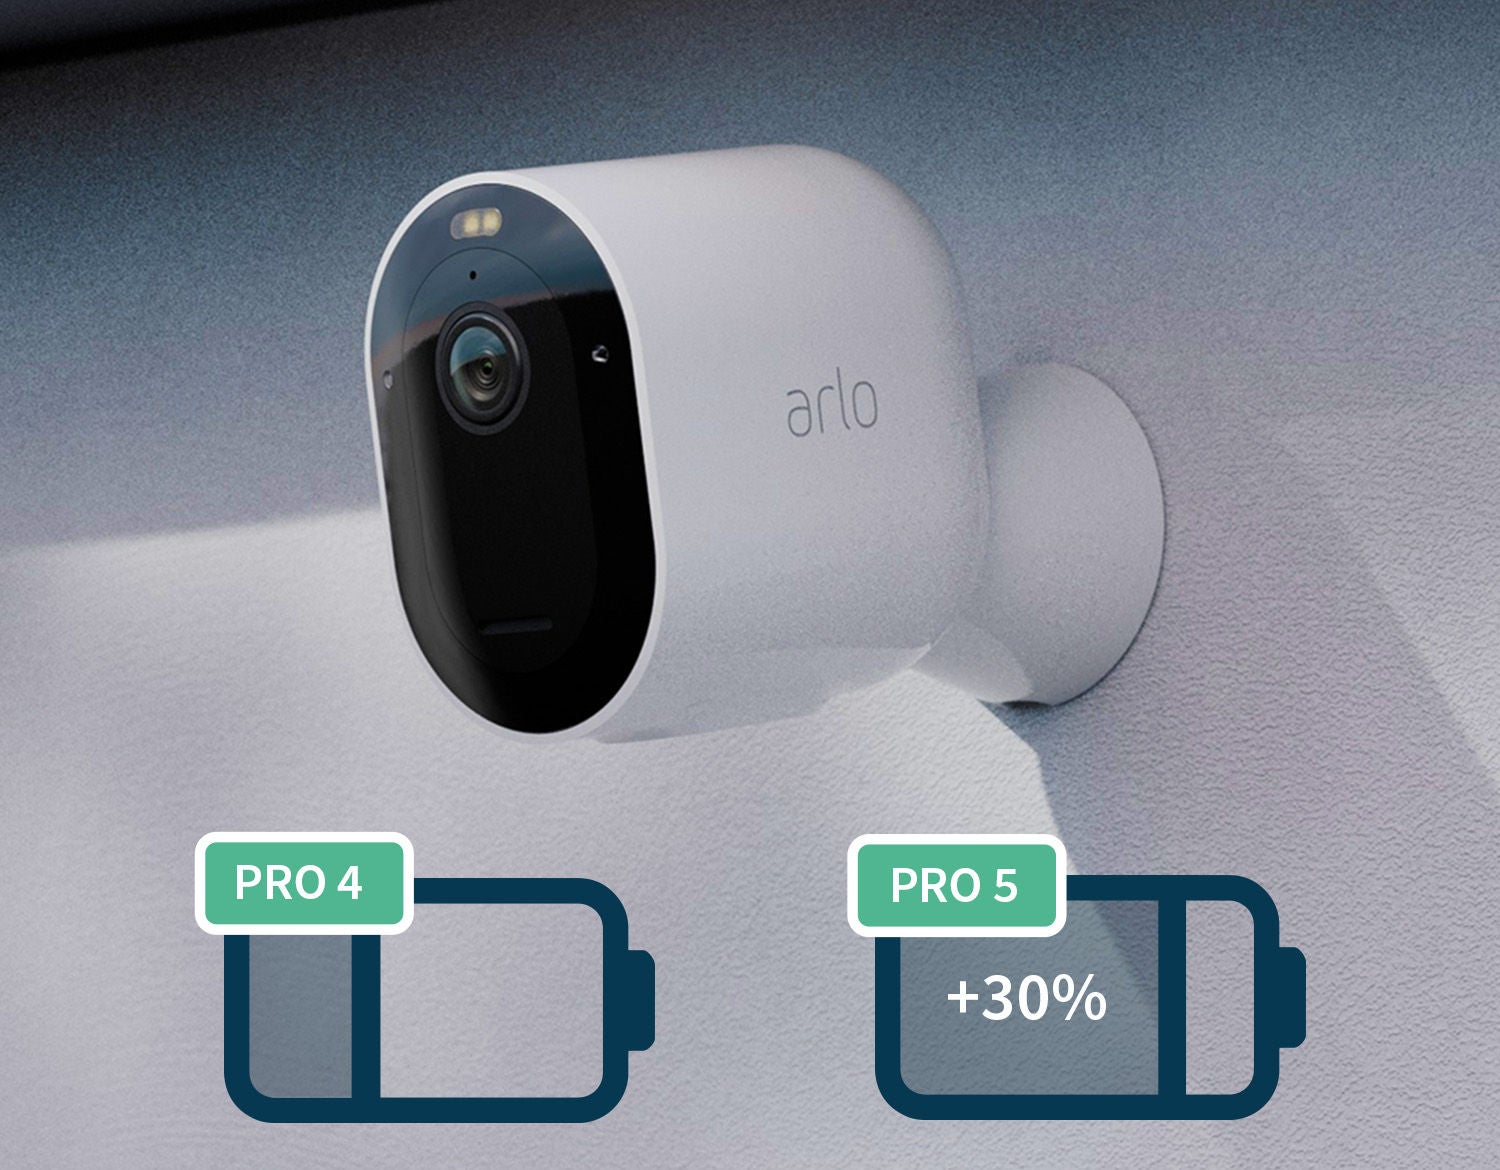  A battery comparison between the Arlo Pro 4 and Pro 5 security cameras with +30% battery life with the Pro 5